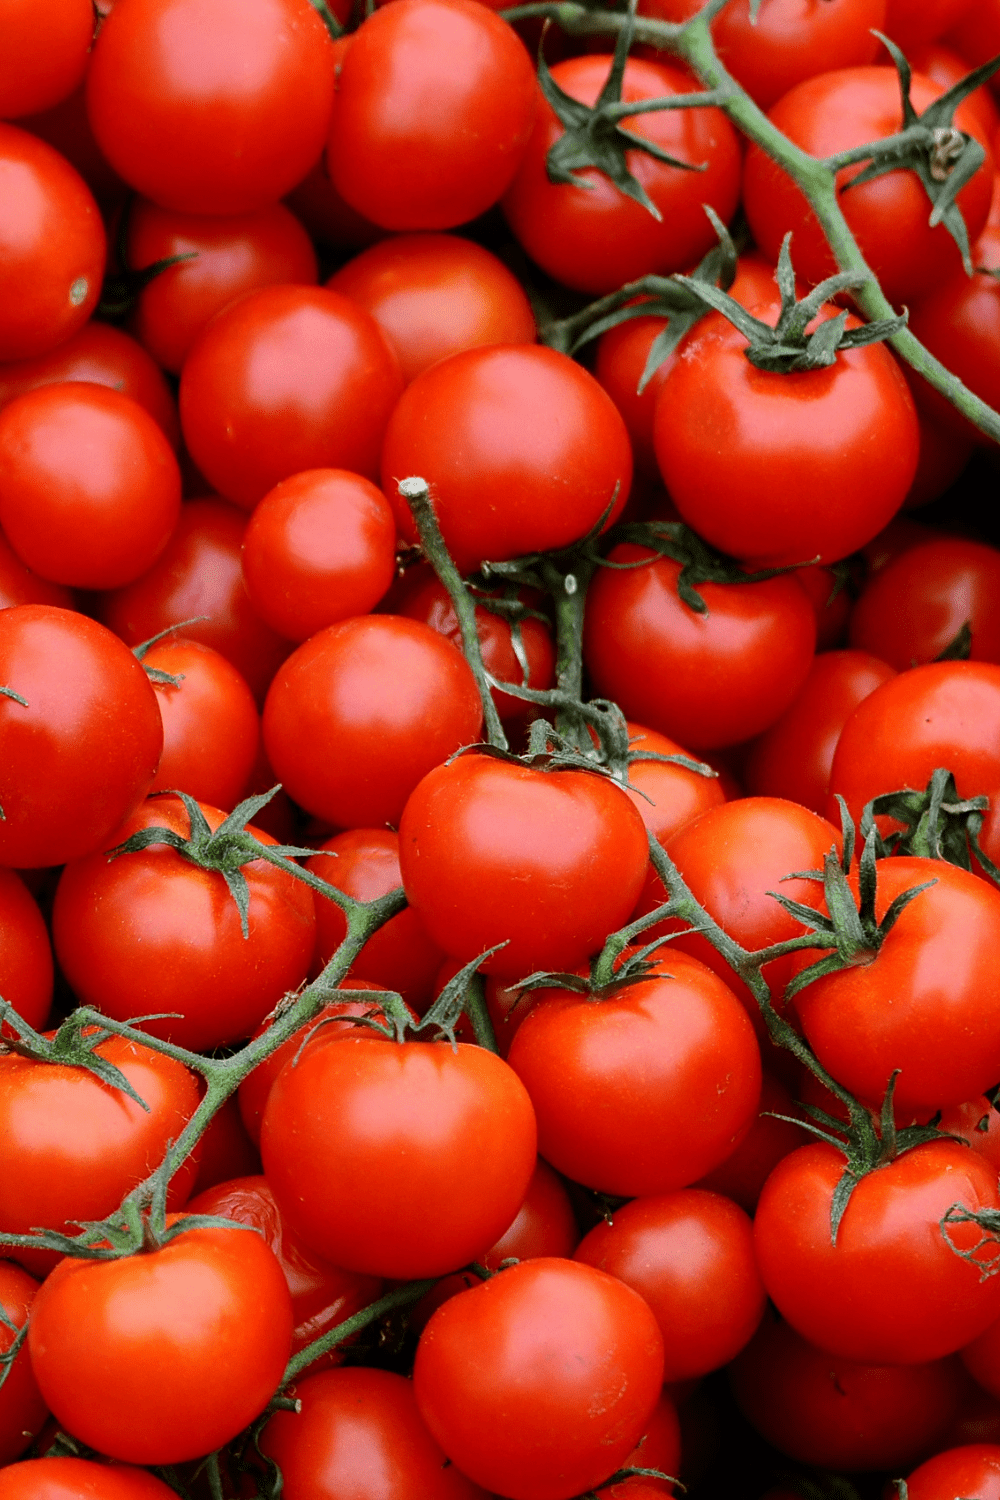 Are Tomatoes Keto?